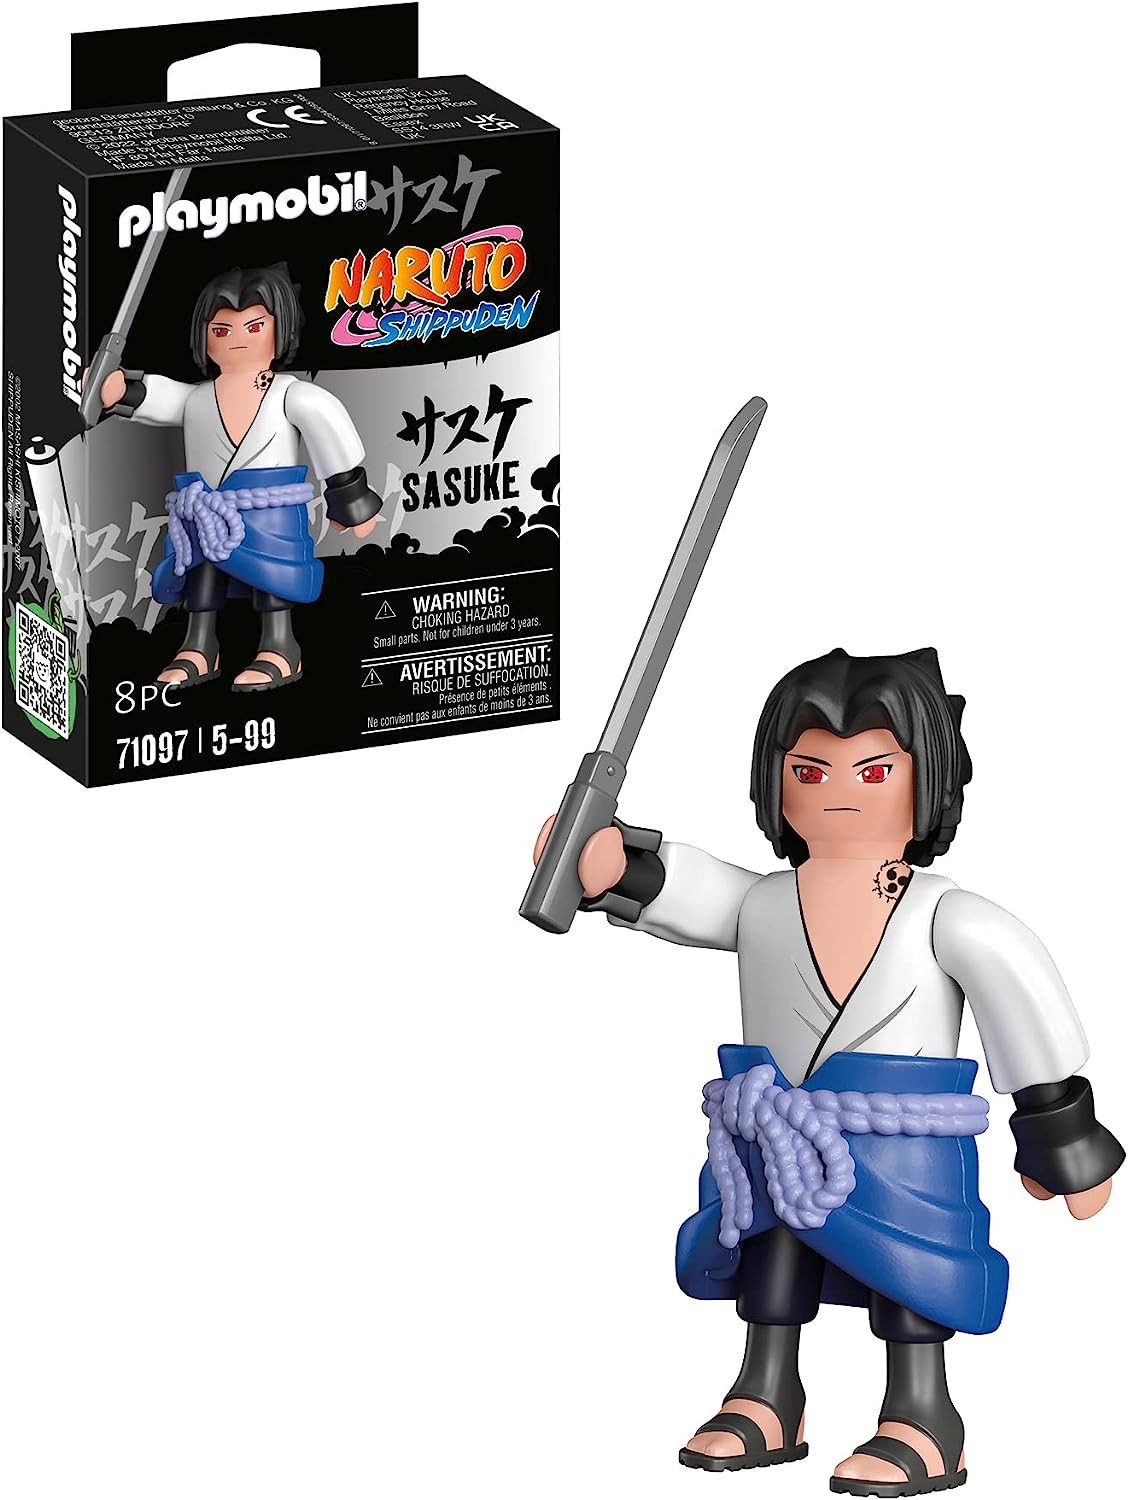 Playmobil Naruto Shippuden 71097 Sasuke with Ninja Sword, Creative Fun for Anime Fans With Great Details and Authentic Extras, 8 Pieces, From 5 Years